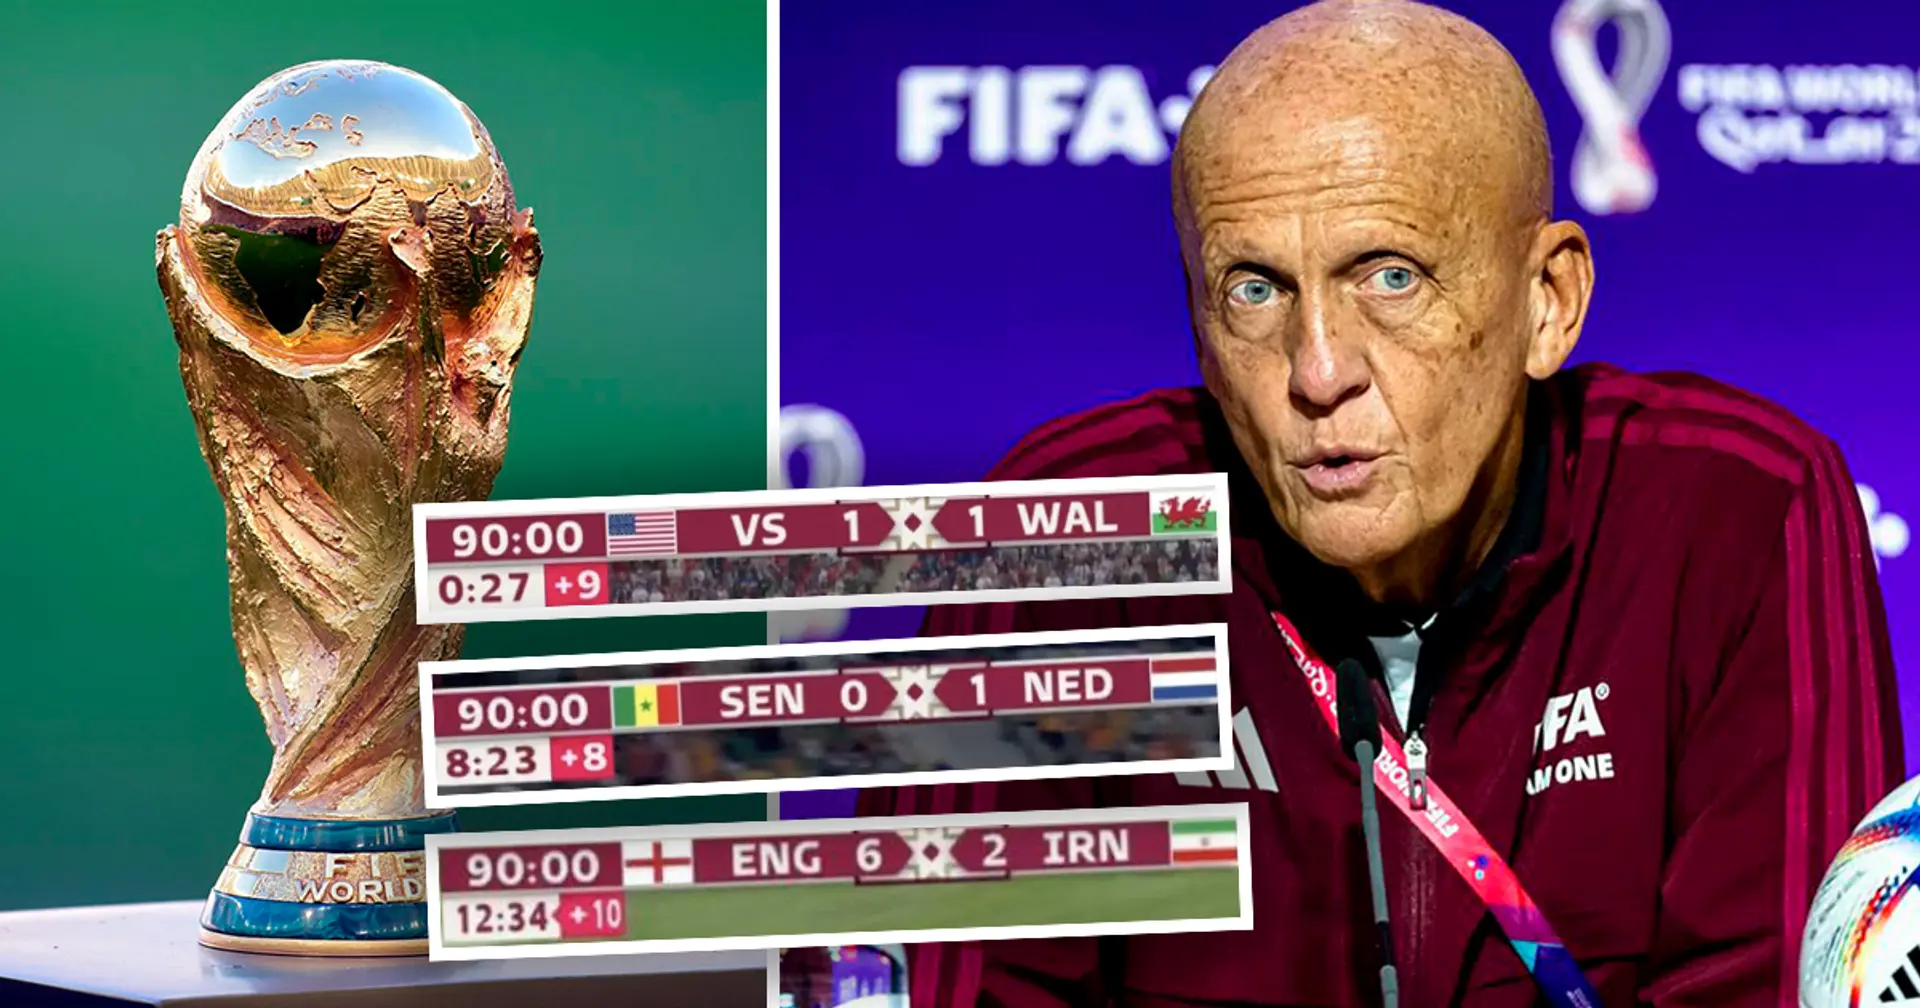 Explained: Why is there so much added time at the World Cup? Legendary referee Pierluigi Collina explains